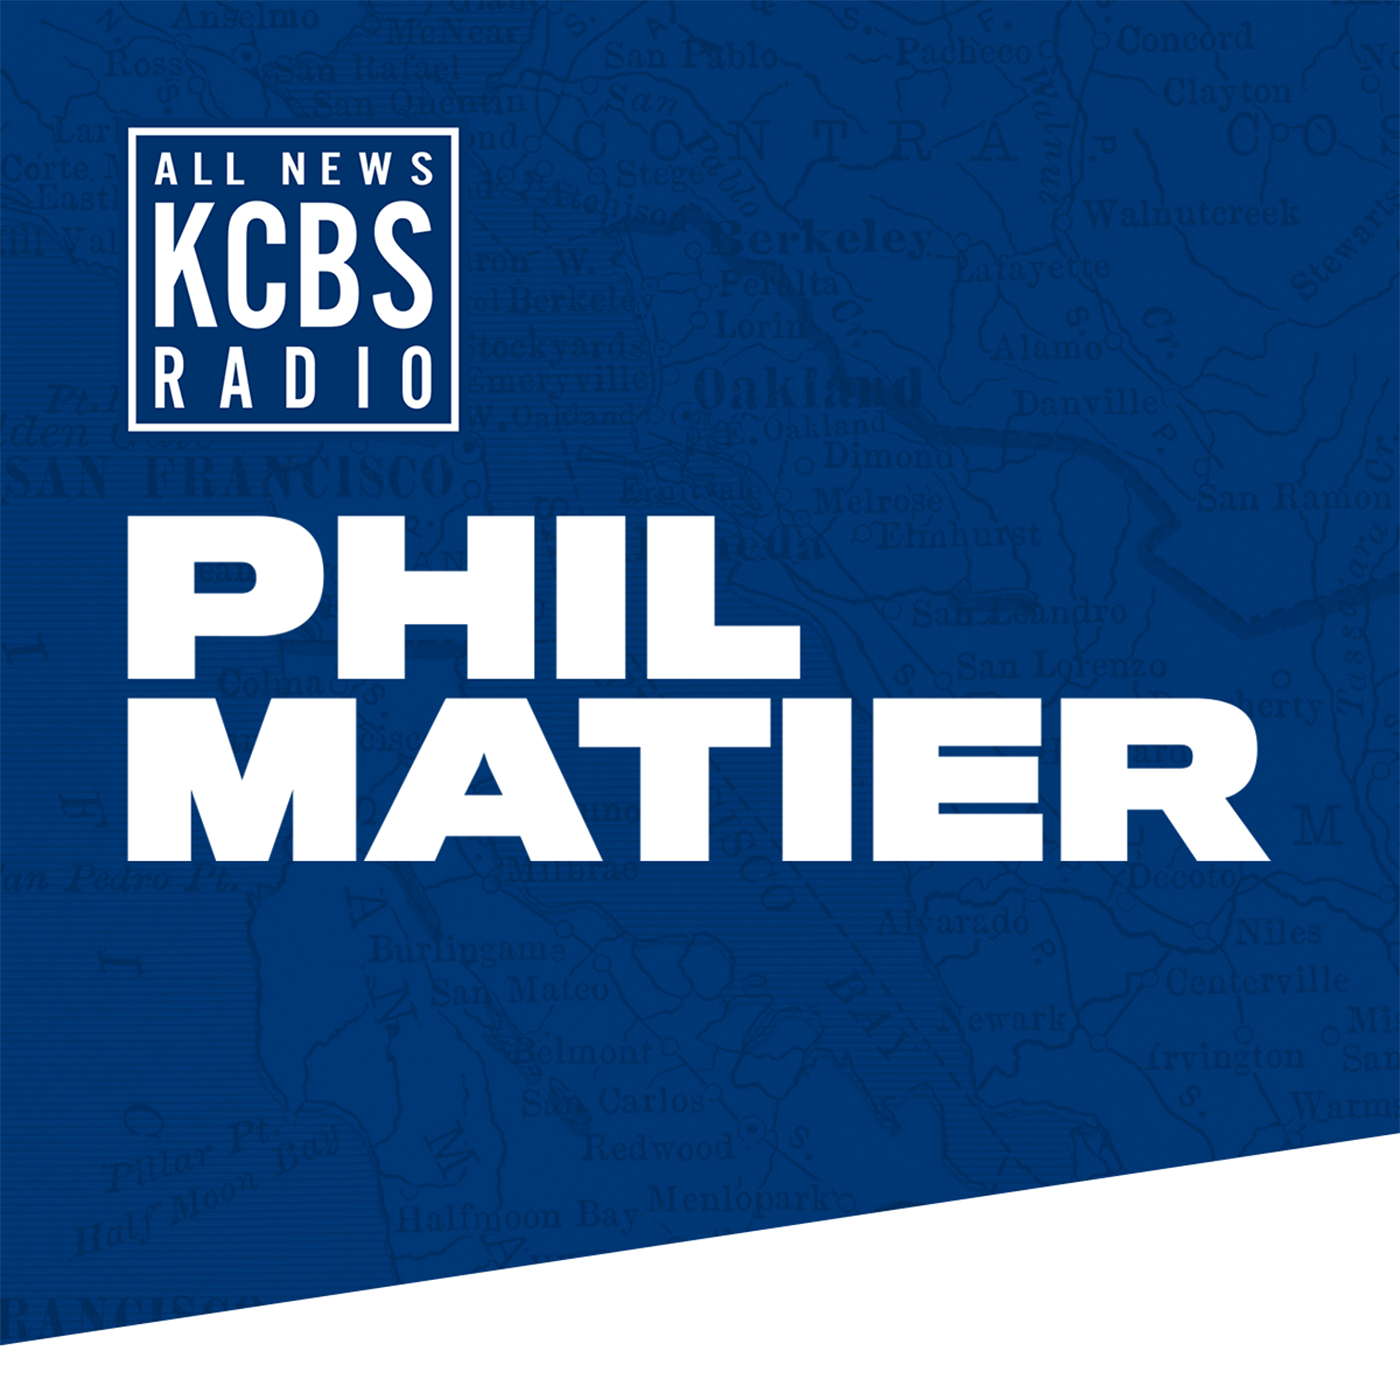 Phil Matier: What must be done to increase vaccinations in California?